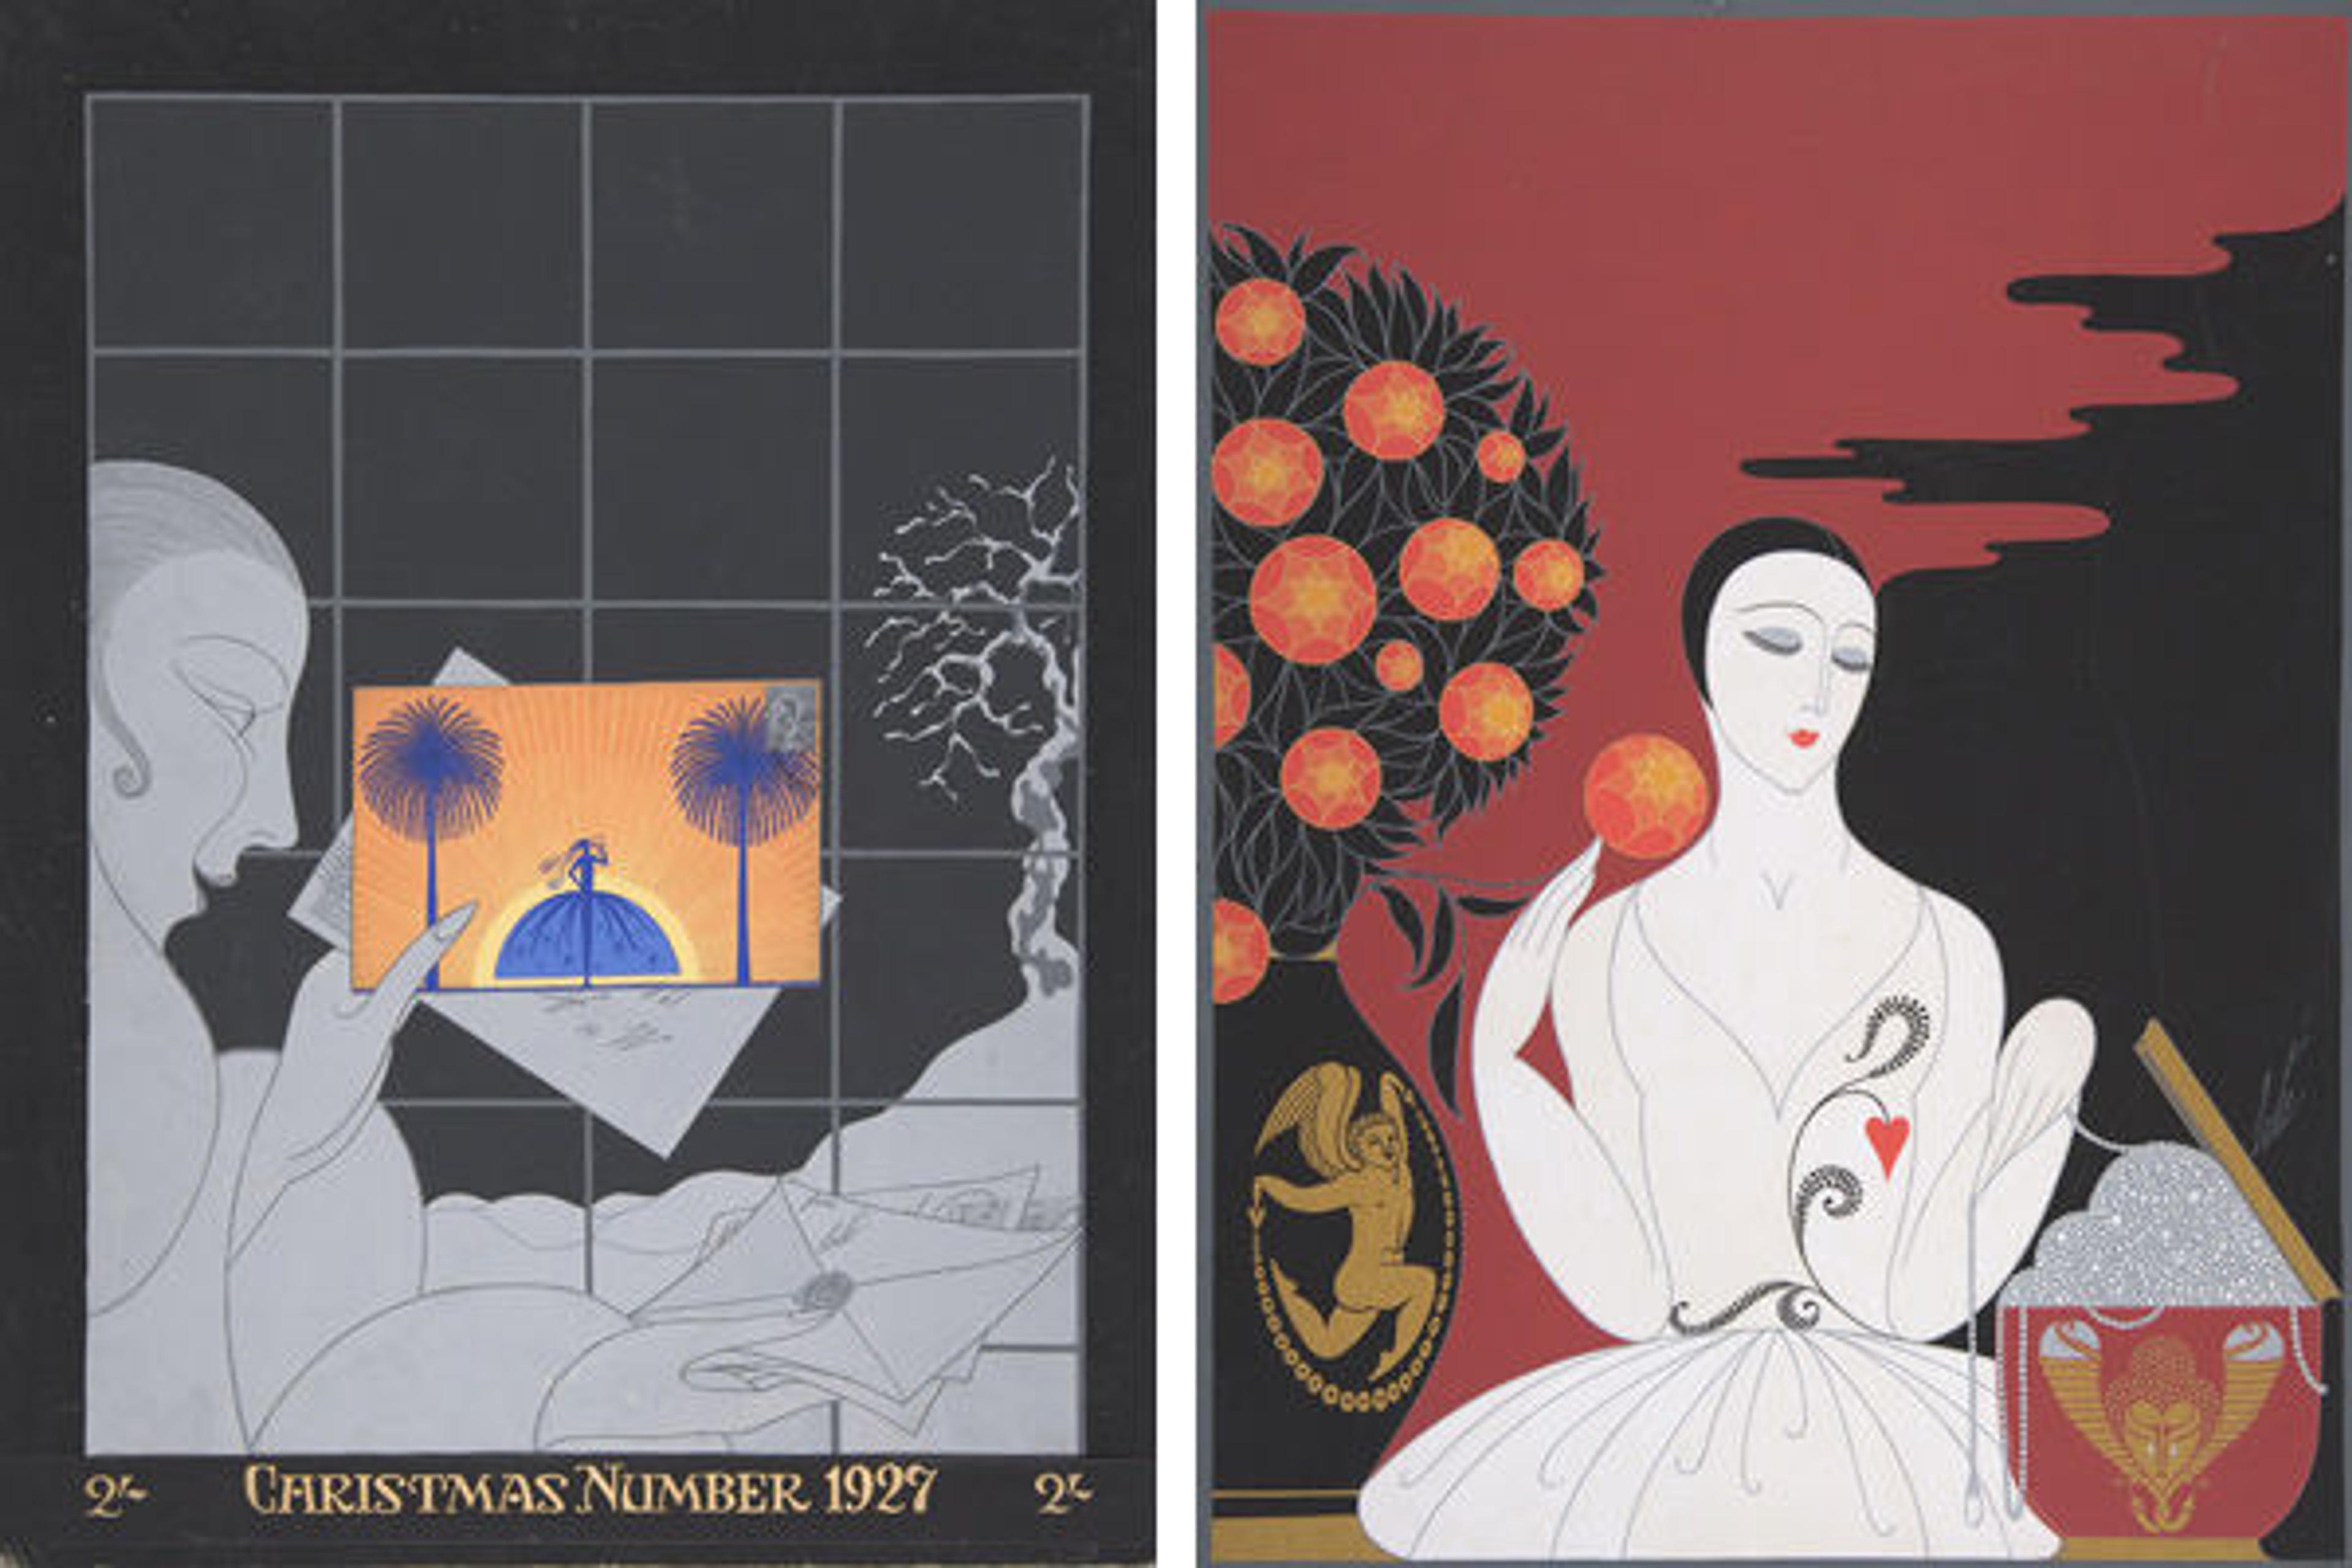 Left: Fig. 2. Erté (Romain de Tirtoff) (French [born Russia], 1892–1990). "Riviera": Cover Design for Harper's Bazar, 1925 or Christmas 1927. Gouache on cardboard; 15 3/4 x 11 3/4 in. (40 x 29.9 cm). The Metropolitan Museum of Art, New York, Purchase, The Martin Foundation Inc. Gift, 1967 (67.762.102). © 2015 Artists Rights Society (ARS) New York. Right: Fig. 3. Erté (Romain de Tirtoff) (French [born Russia], 1892–1990). "Mariage d'Amour . . . Mariage de Raison": Cover Design for Harper's Bazar, May 1927. Gouache on cardboard; 13 11/16 x 10 3/16 in. (34.8 x 25.9 cm). The Metropolitan Museum of Art, New York, Purchase, The Martin Foundation Inc. Gift, 1967 (67.762.99). © 2015 Artists Rights Society (ARS) New York